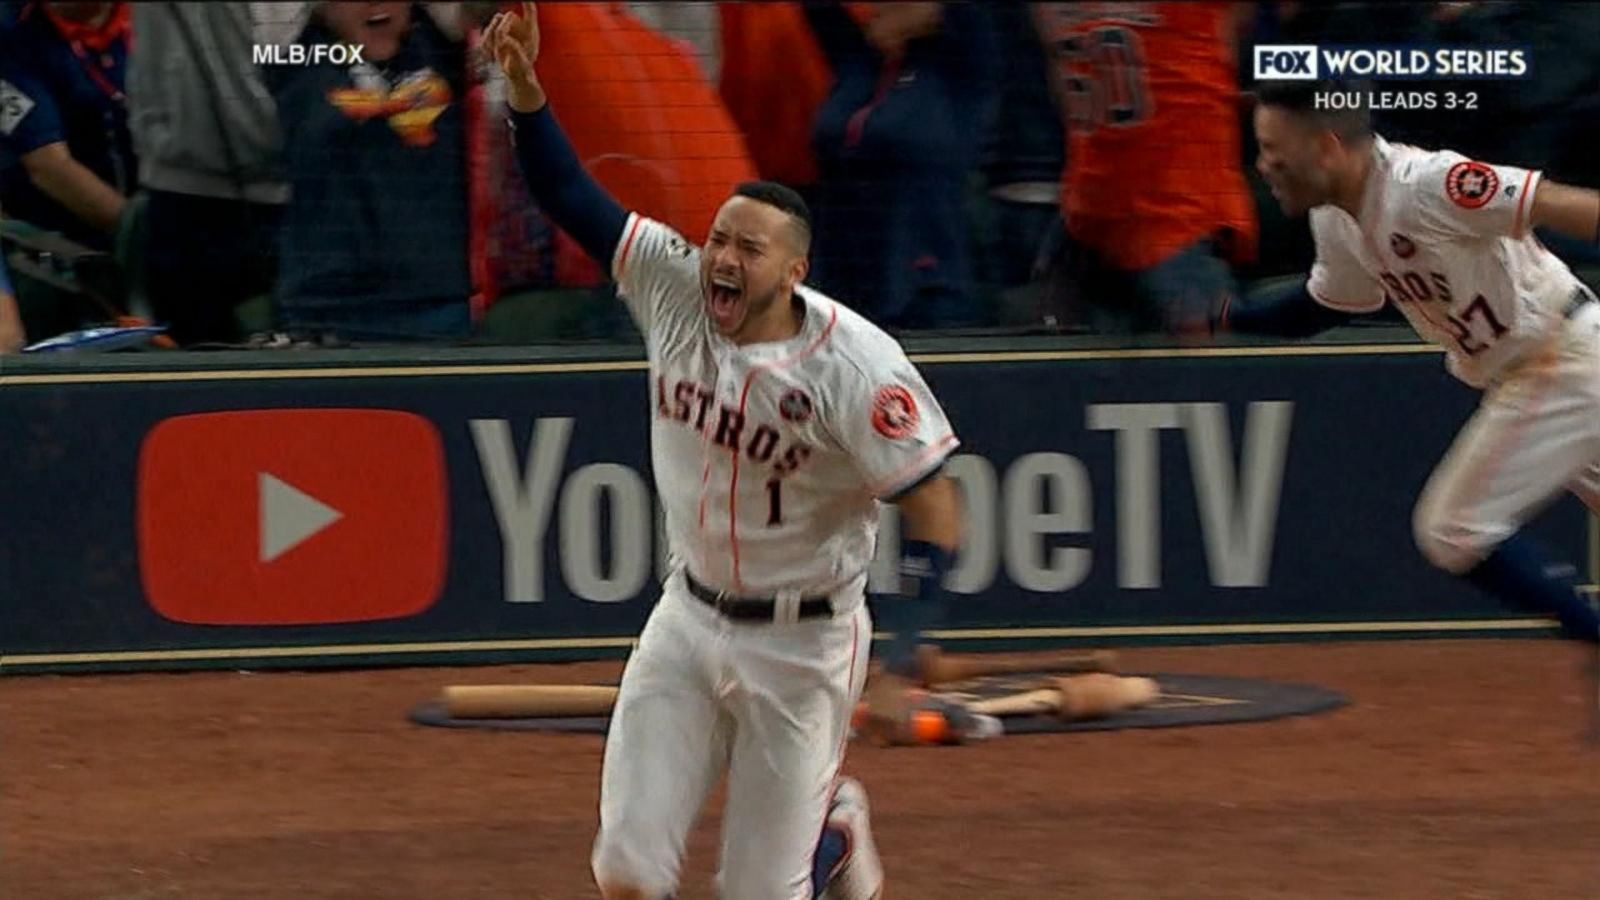 Astros beat Dodgers to win first World Series